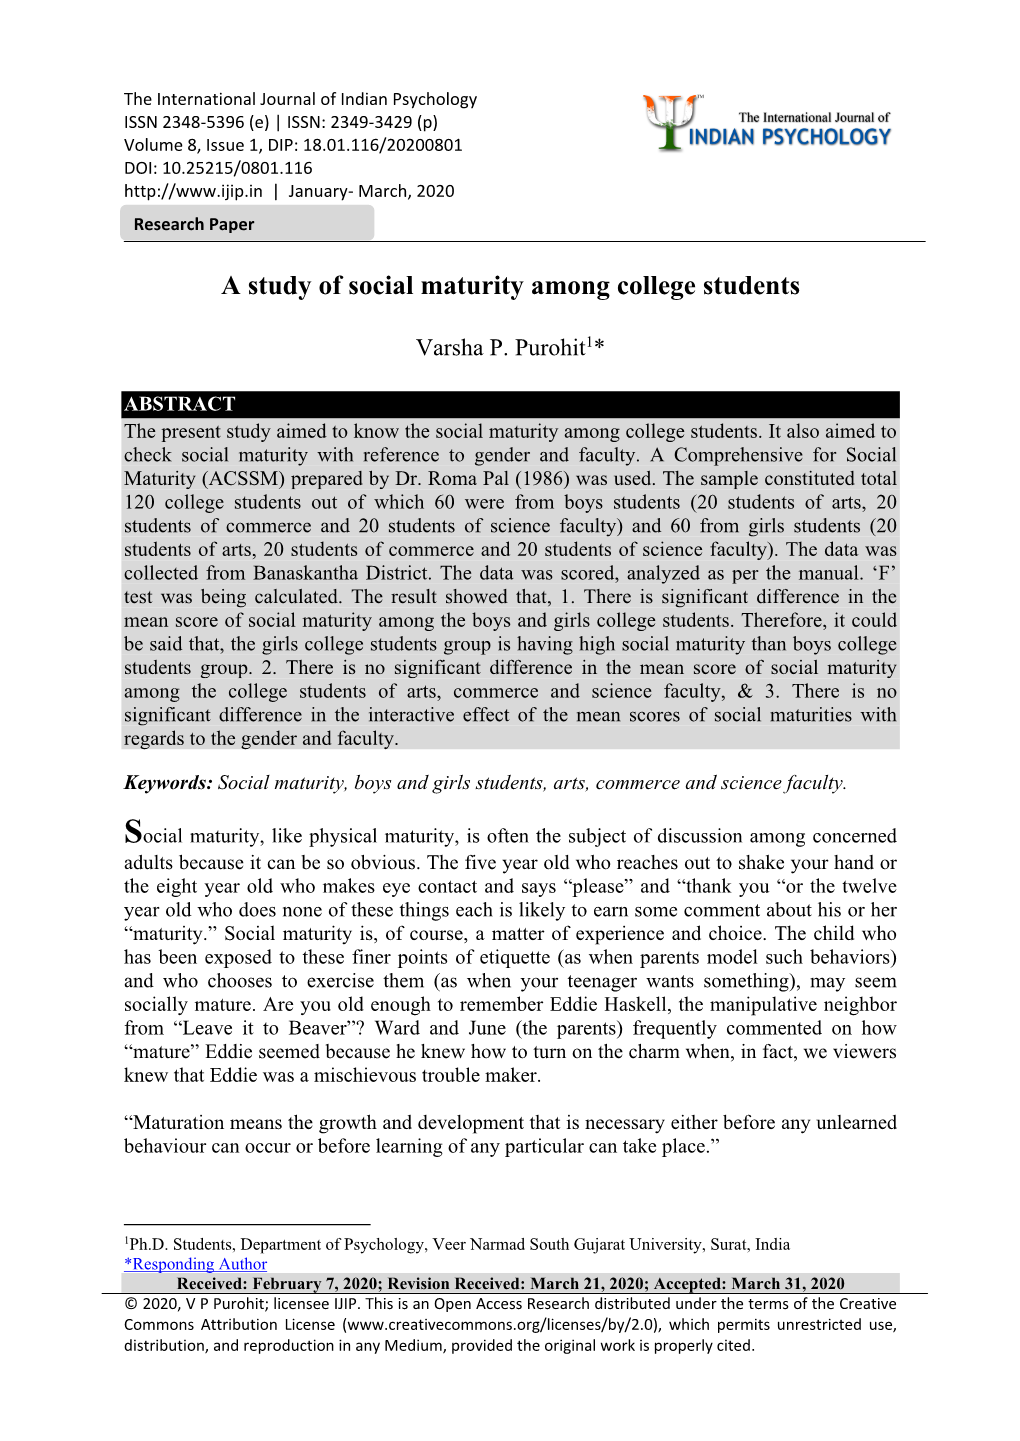 A Study of Social Maturity Among College Students